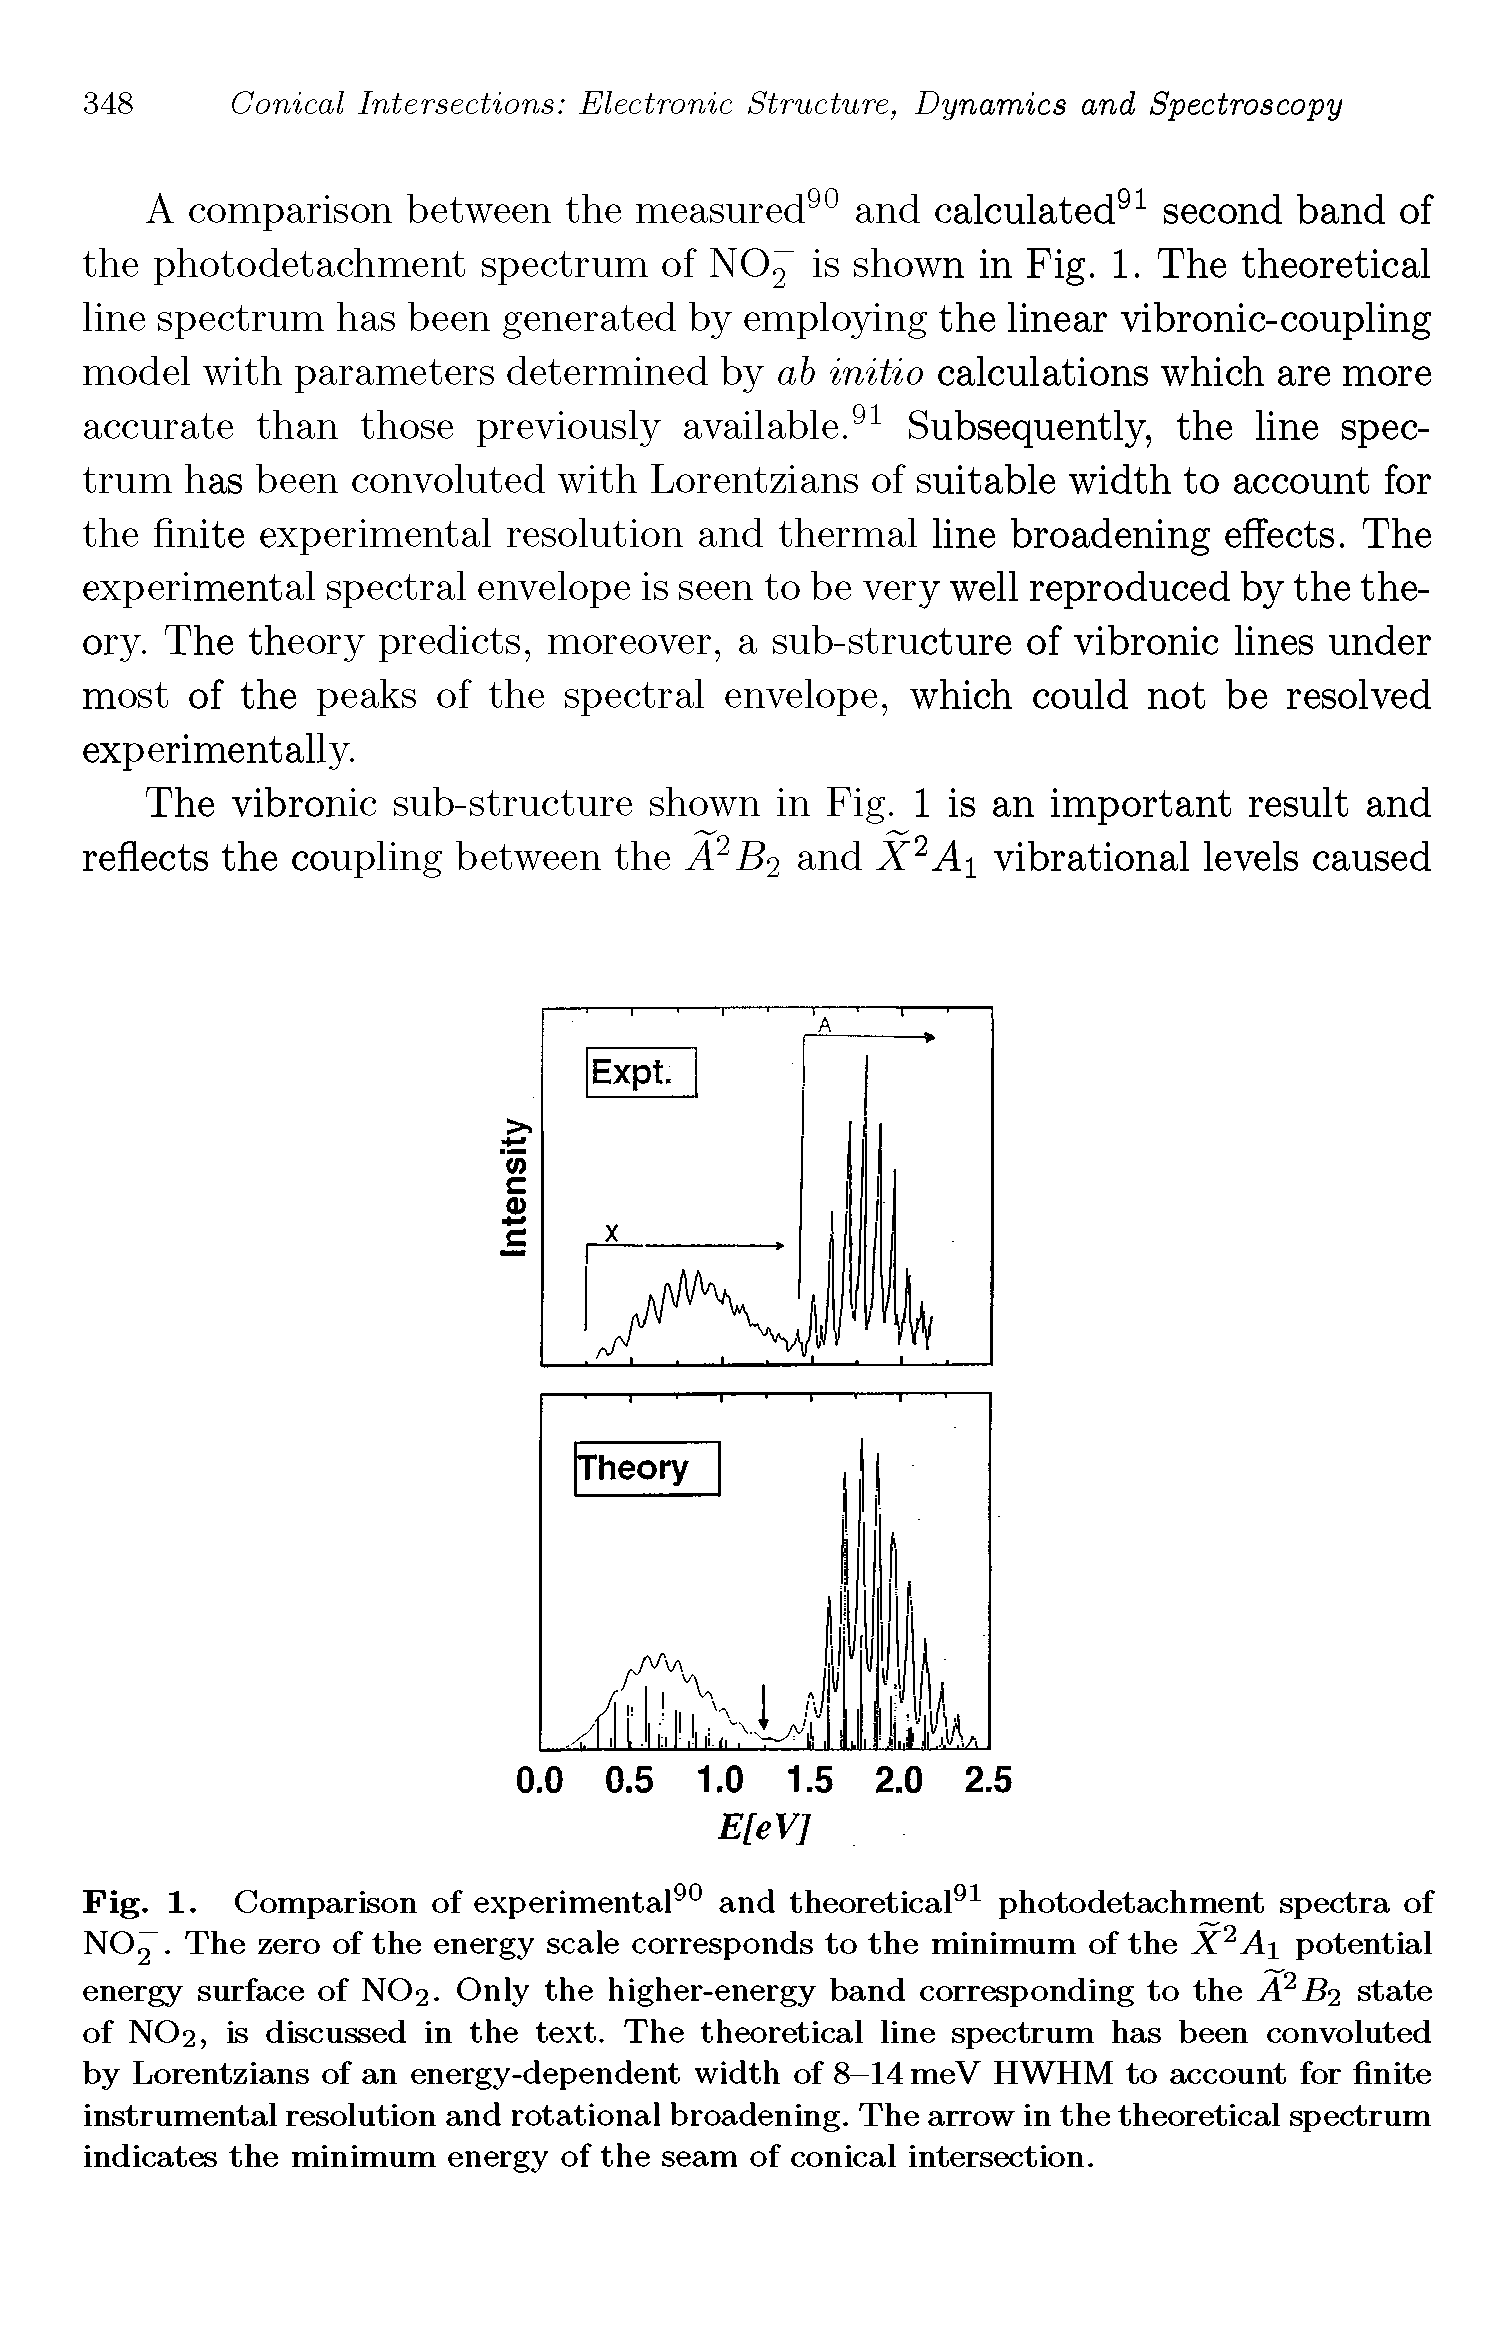 Fig. 1. Comparison of experimental and theoretical photodetachment spectra of N02. The zero of the energy scale corresponds to the minimum of the X Ai potential energy surface of NO2. Only the higher-energy band corresponding to the state...